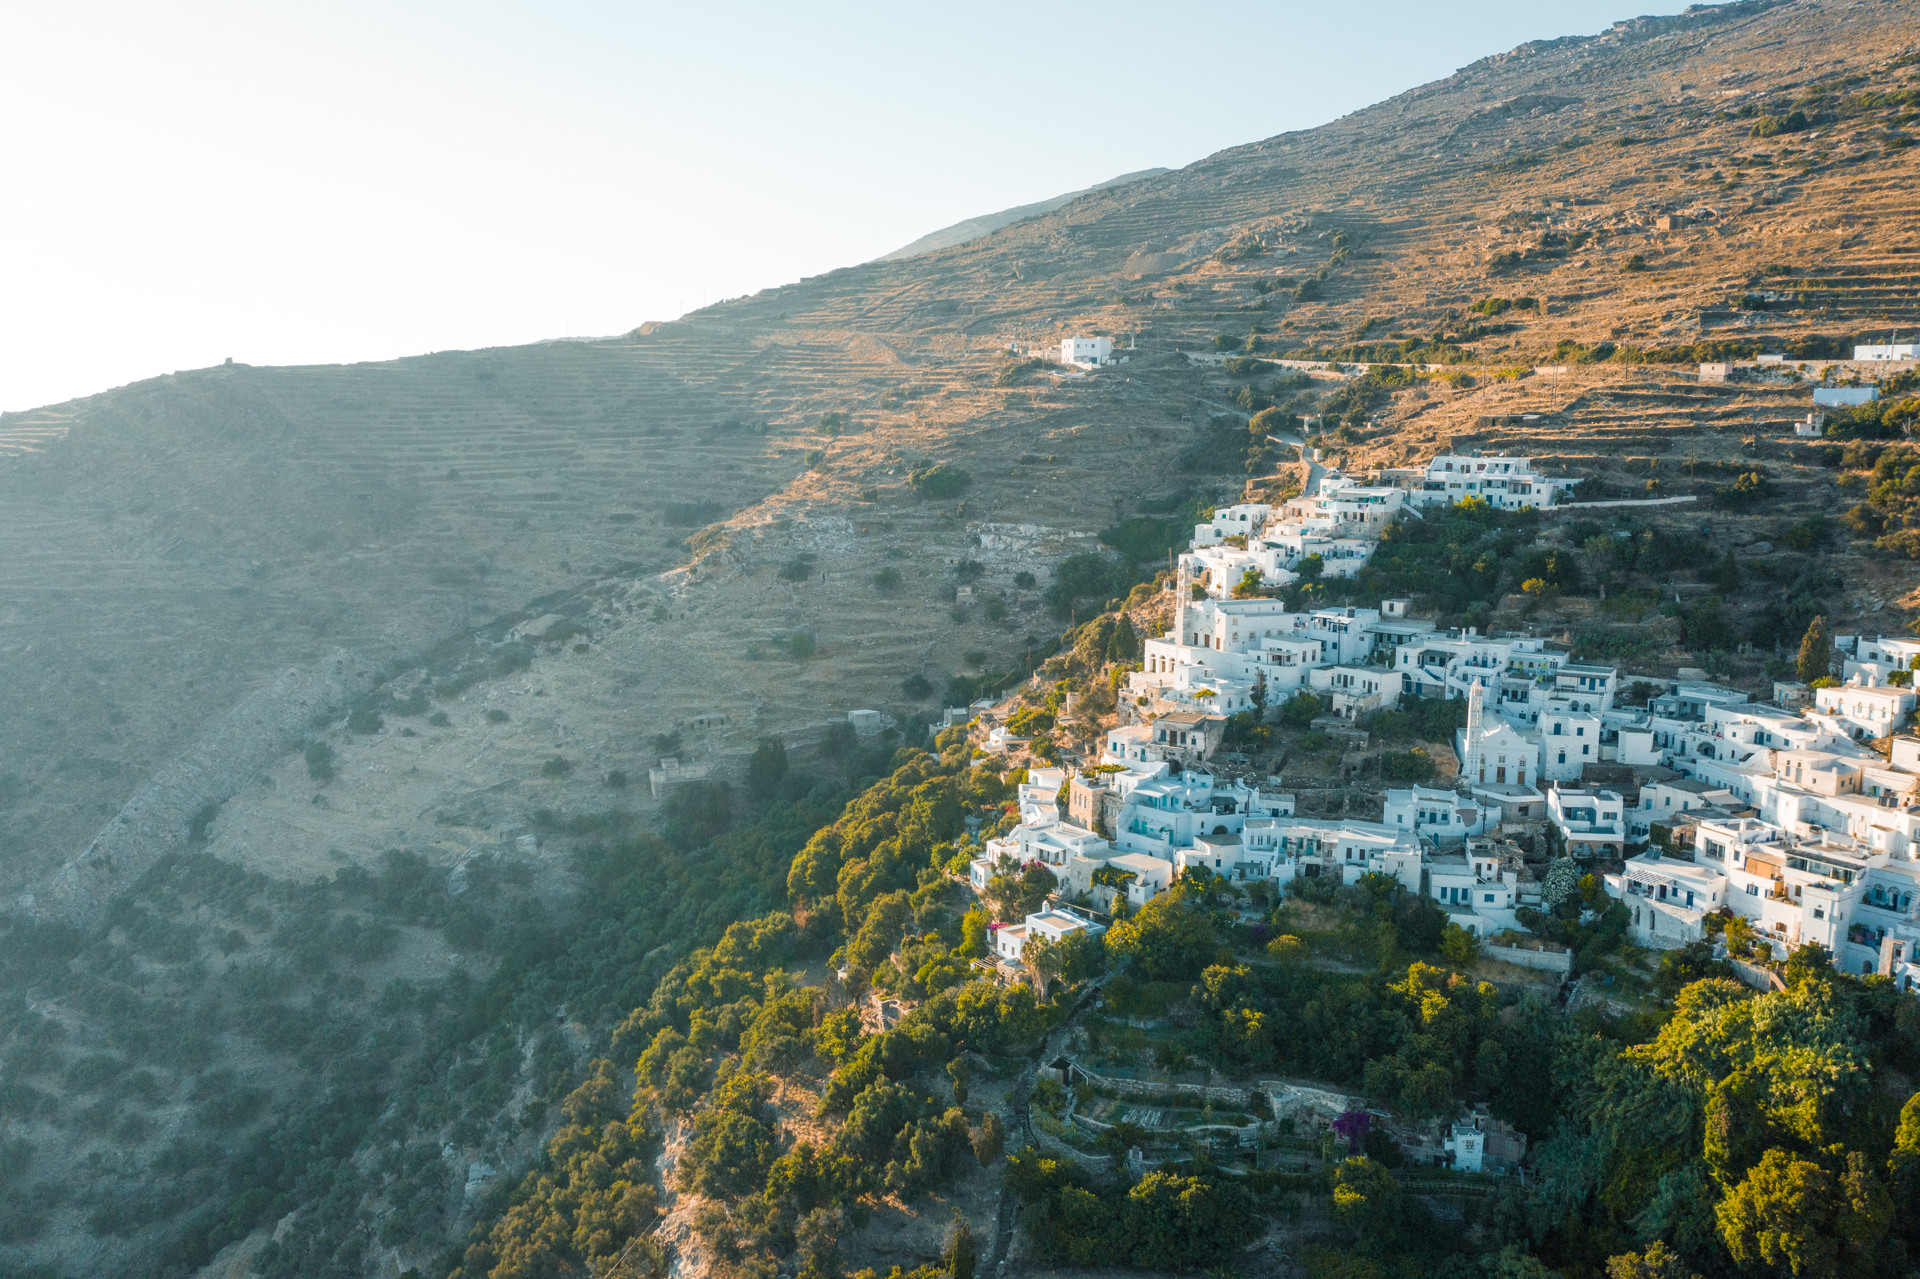 Built into the slope of a mountain, Kardiani has one of the most spectacular sea views in Tinos